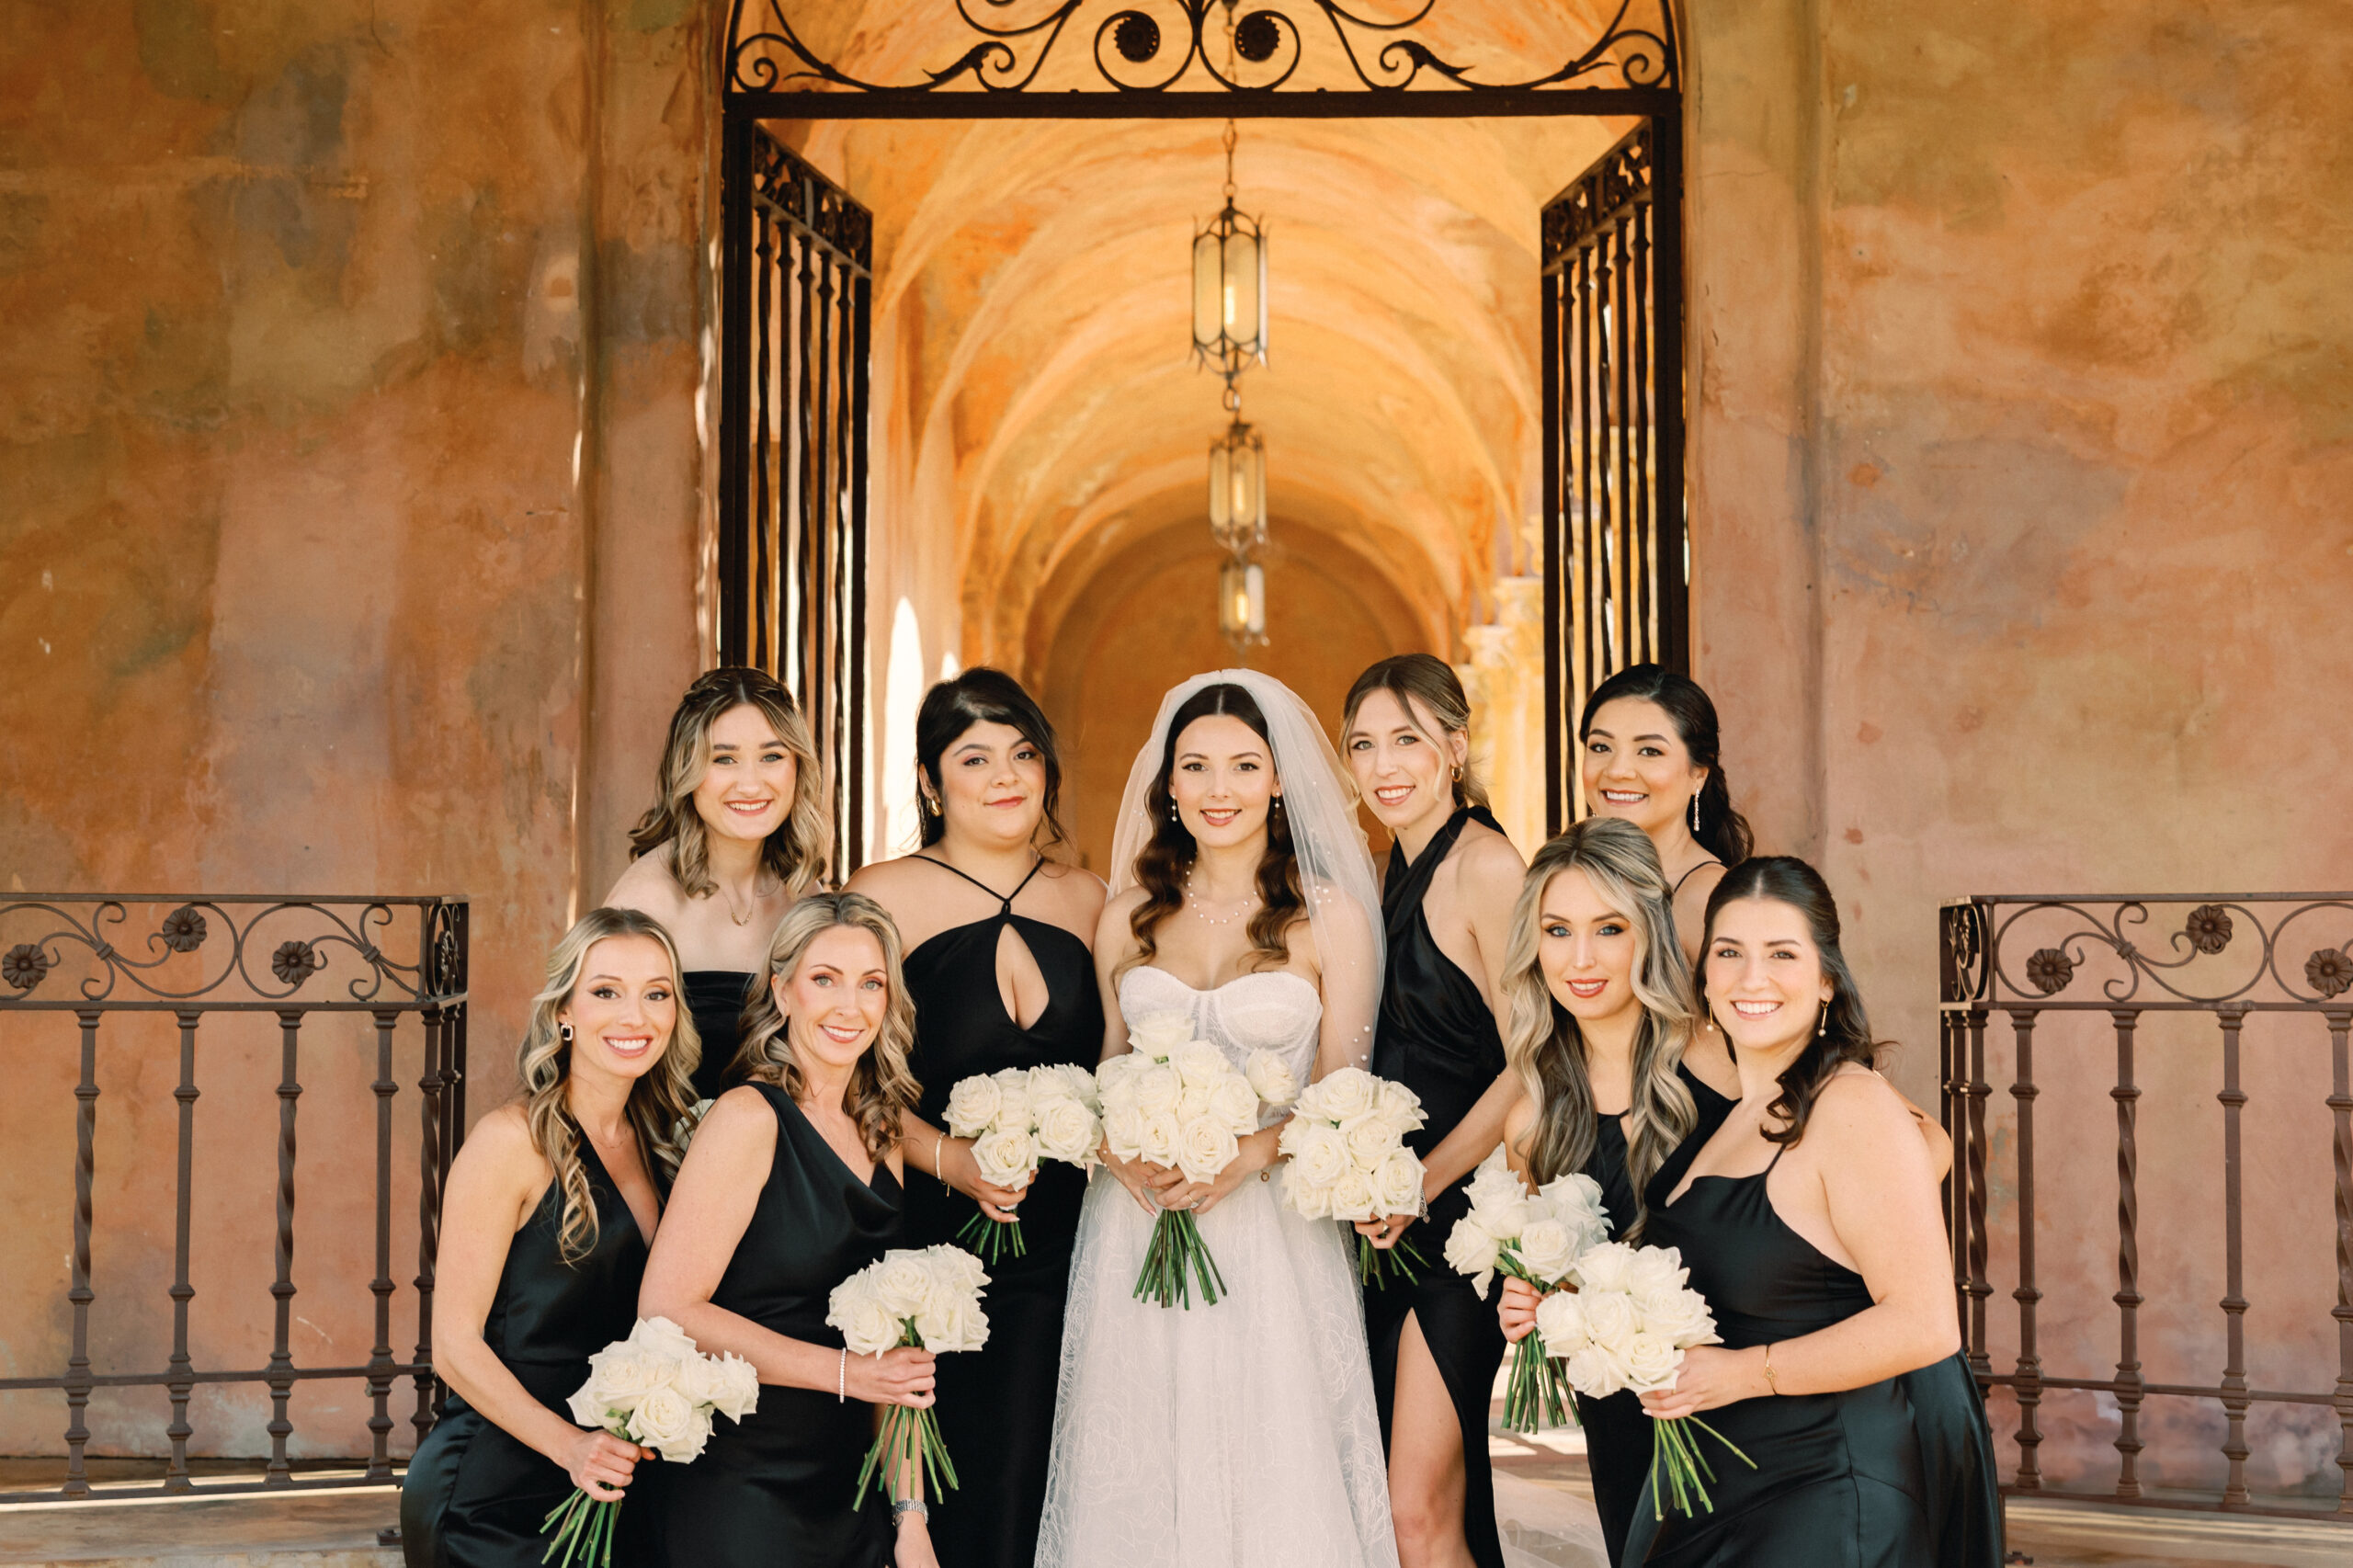 Bride and bridal party of 8 Bridesmaids with Makeup by the hair and makeup artists at Kristy's Artistry Design Team in Orlando FL